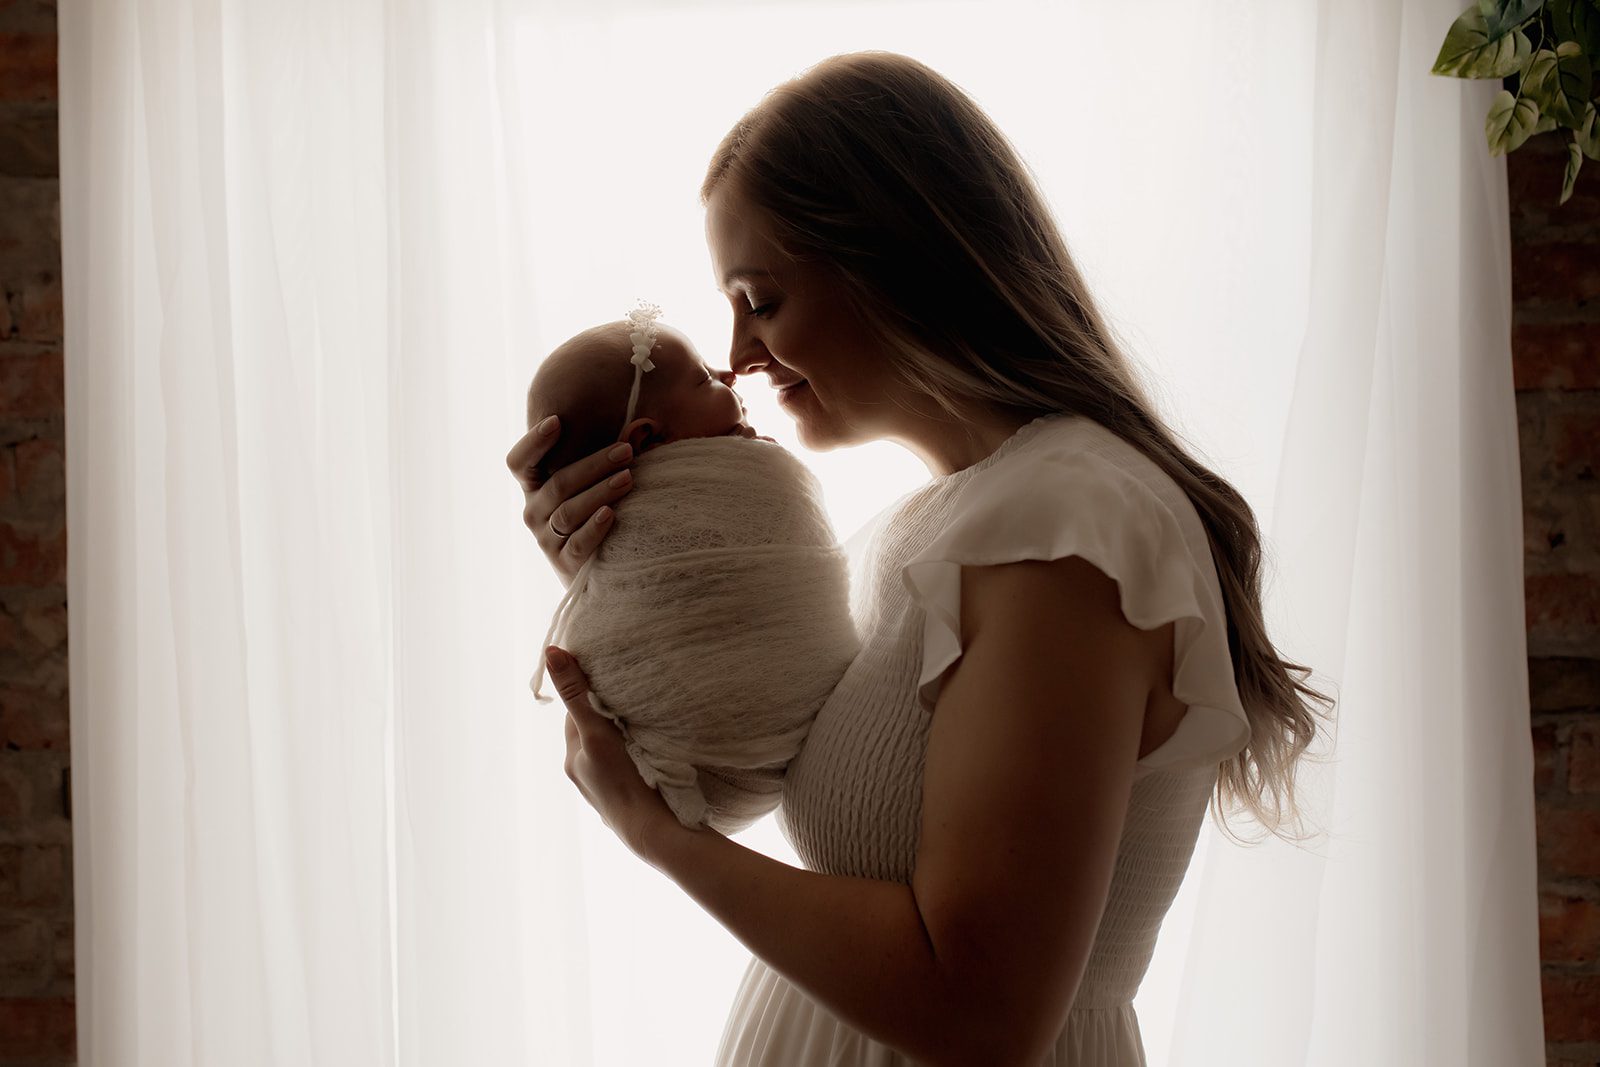 Silhouette of a mom nuzzling her sleeping newborn baby in a window after using Beautiful birth choices